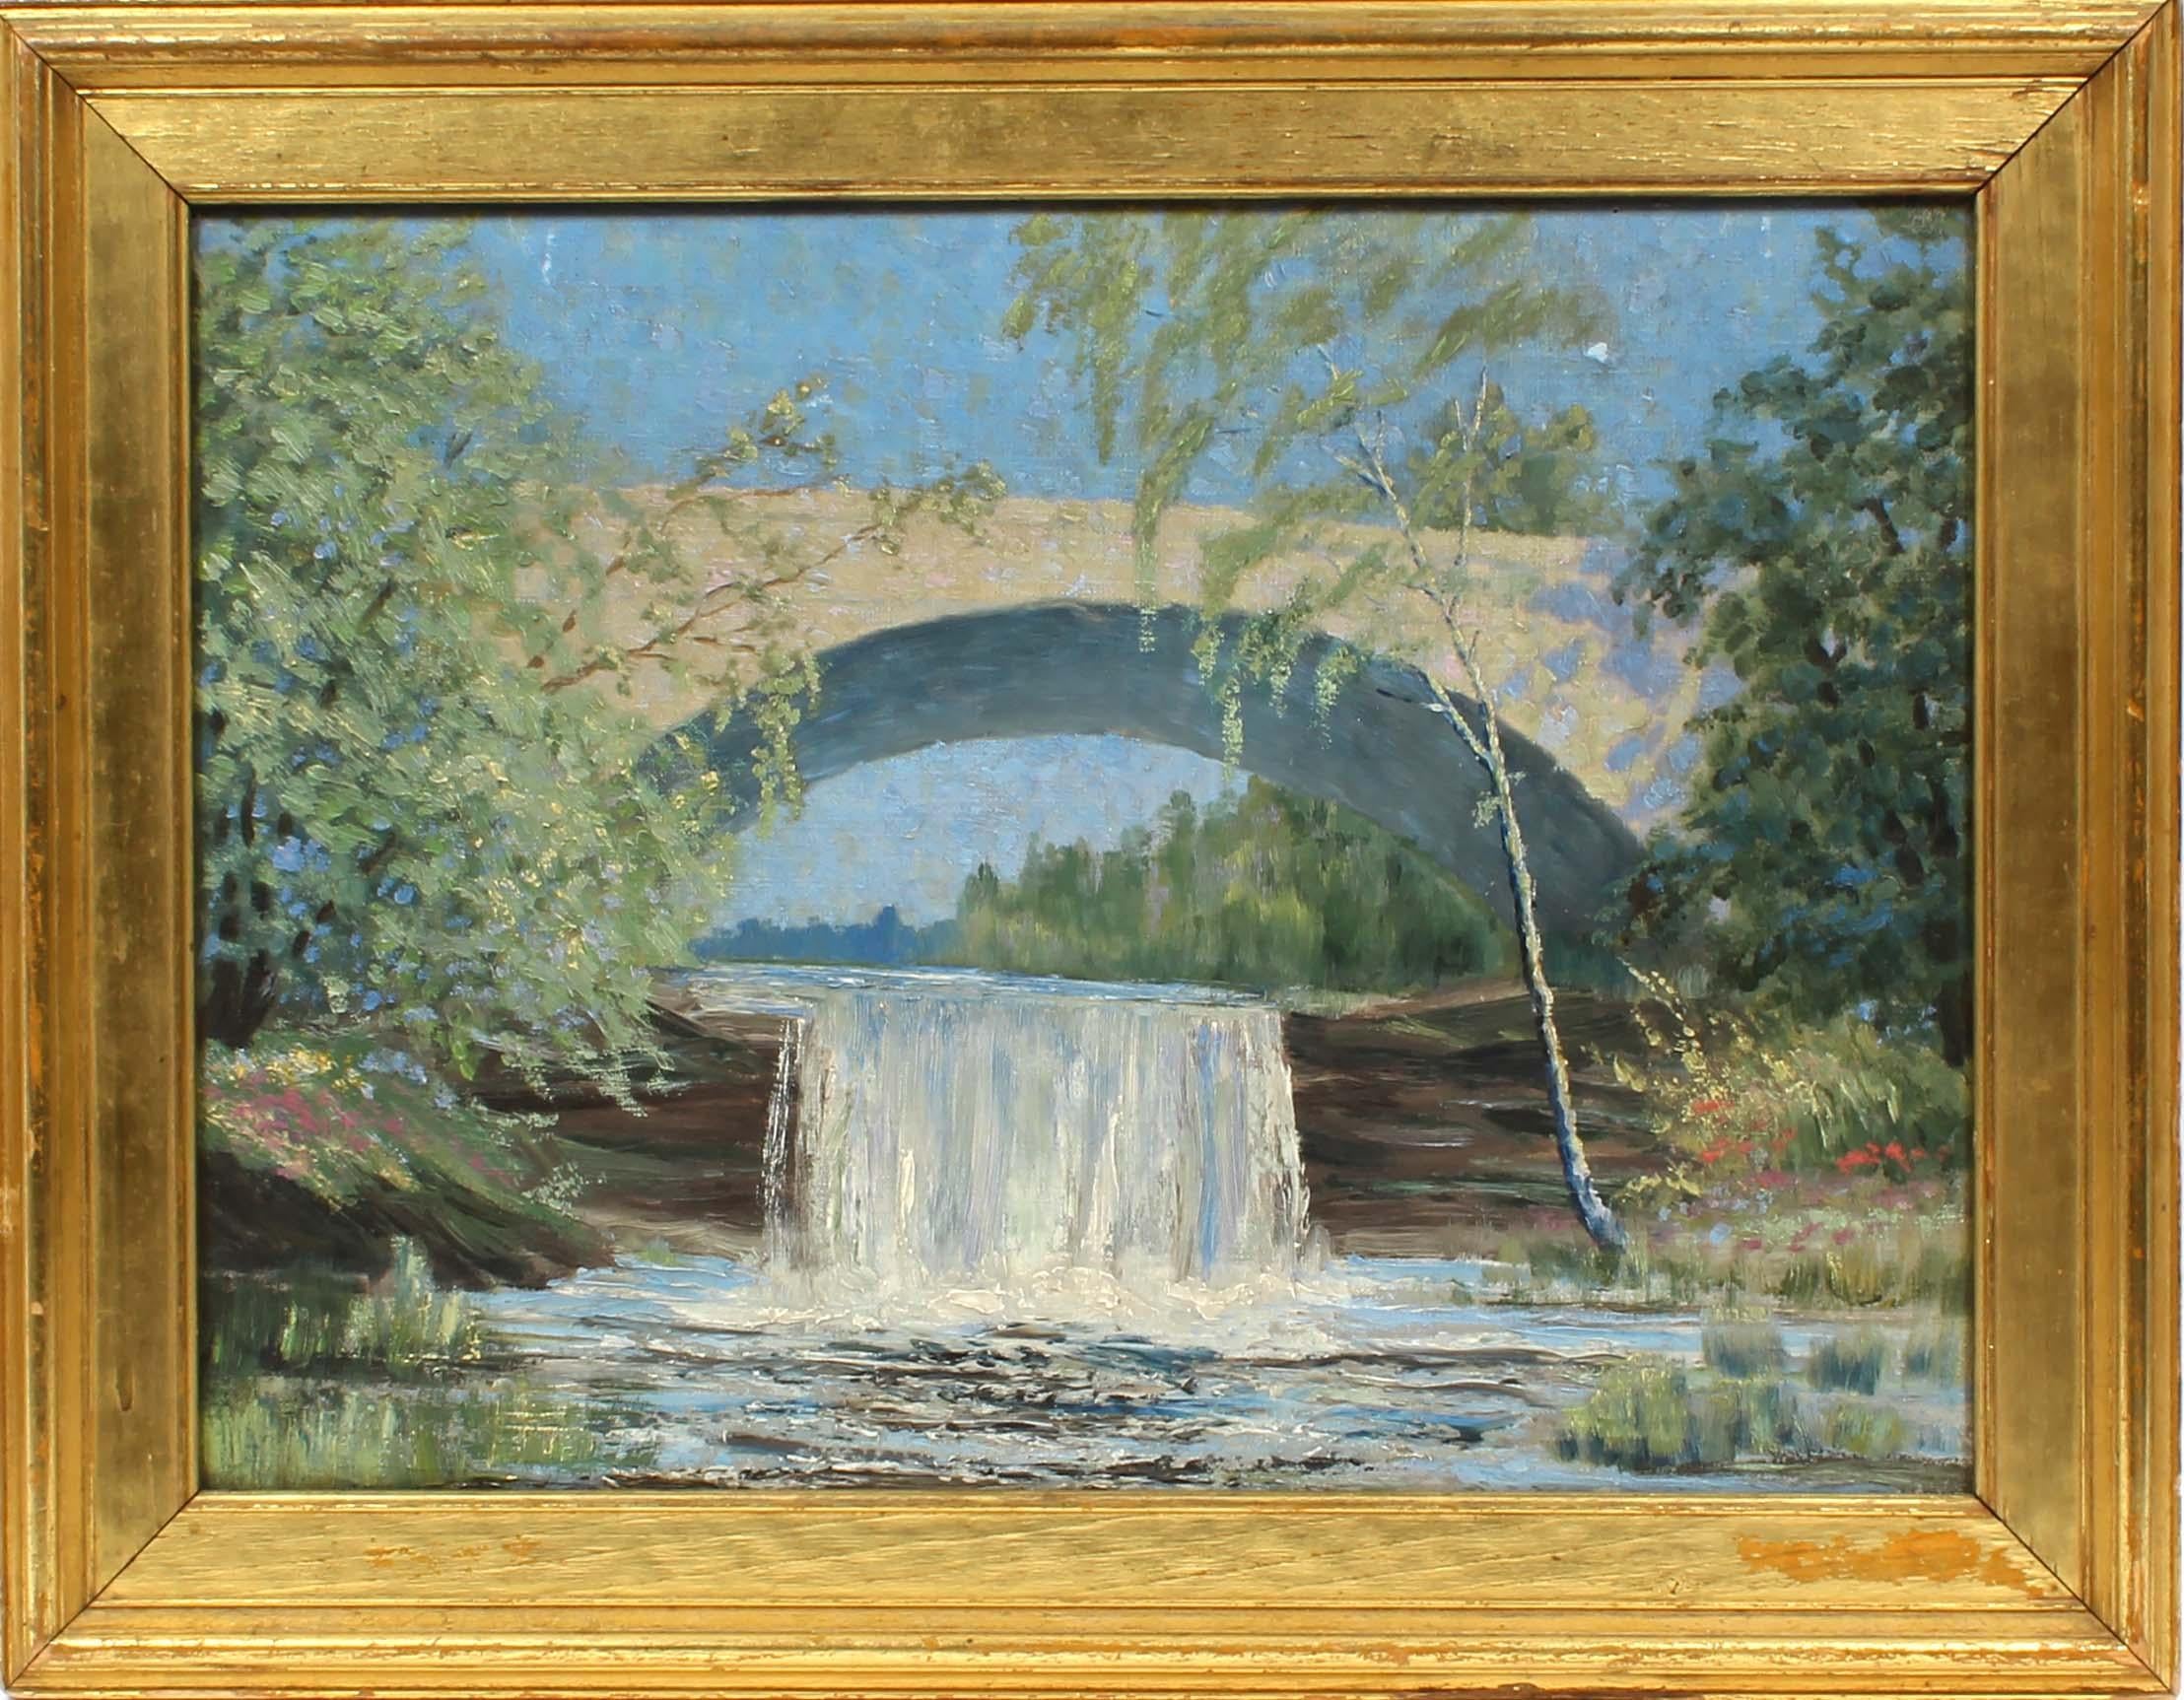 Antique American landscape oil painting of a bridge on the Rocky River in Cleveland. Unknown artist, framed, oil on canvas.